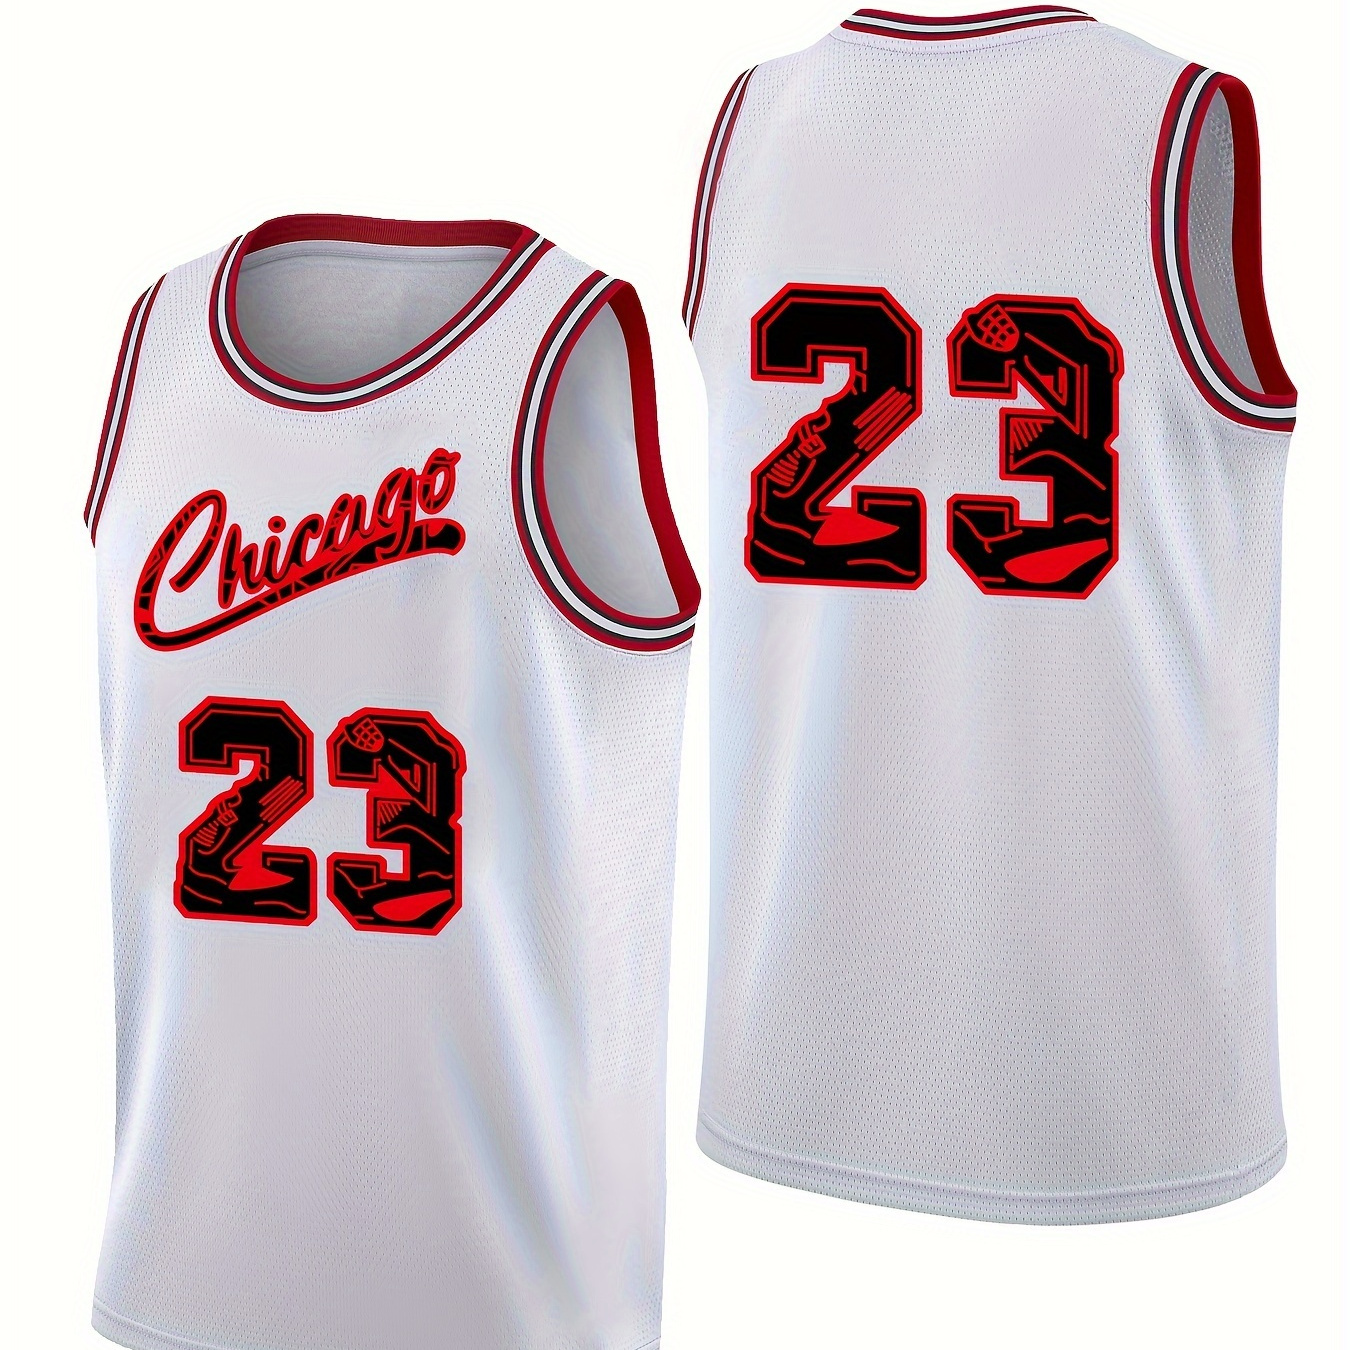 

Men's Chicago & #23 Graphic Print Basketball Jersey Tank Top, Competition Party Training Clothing